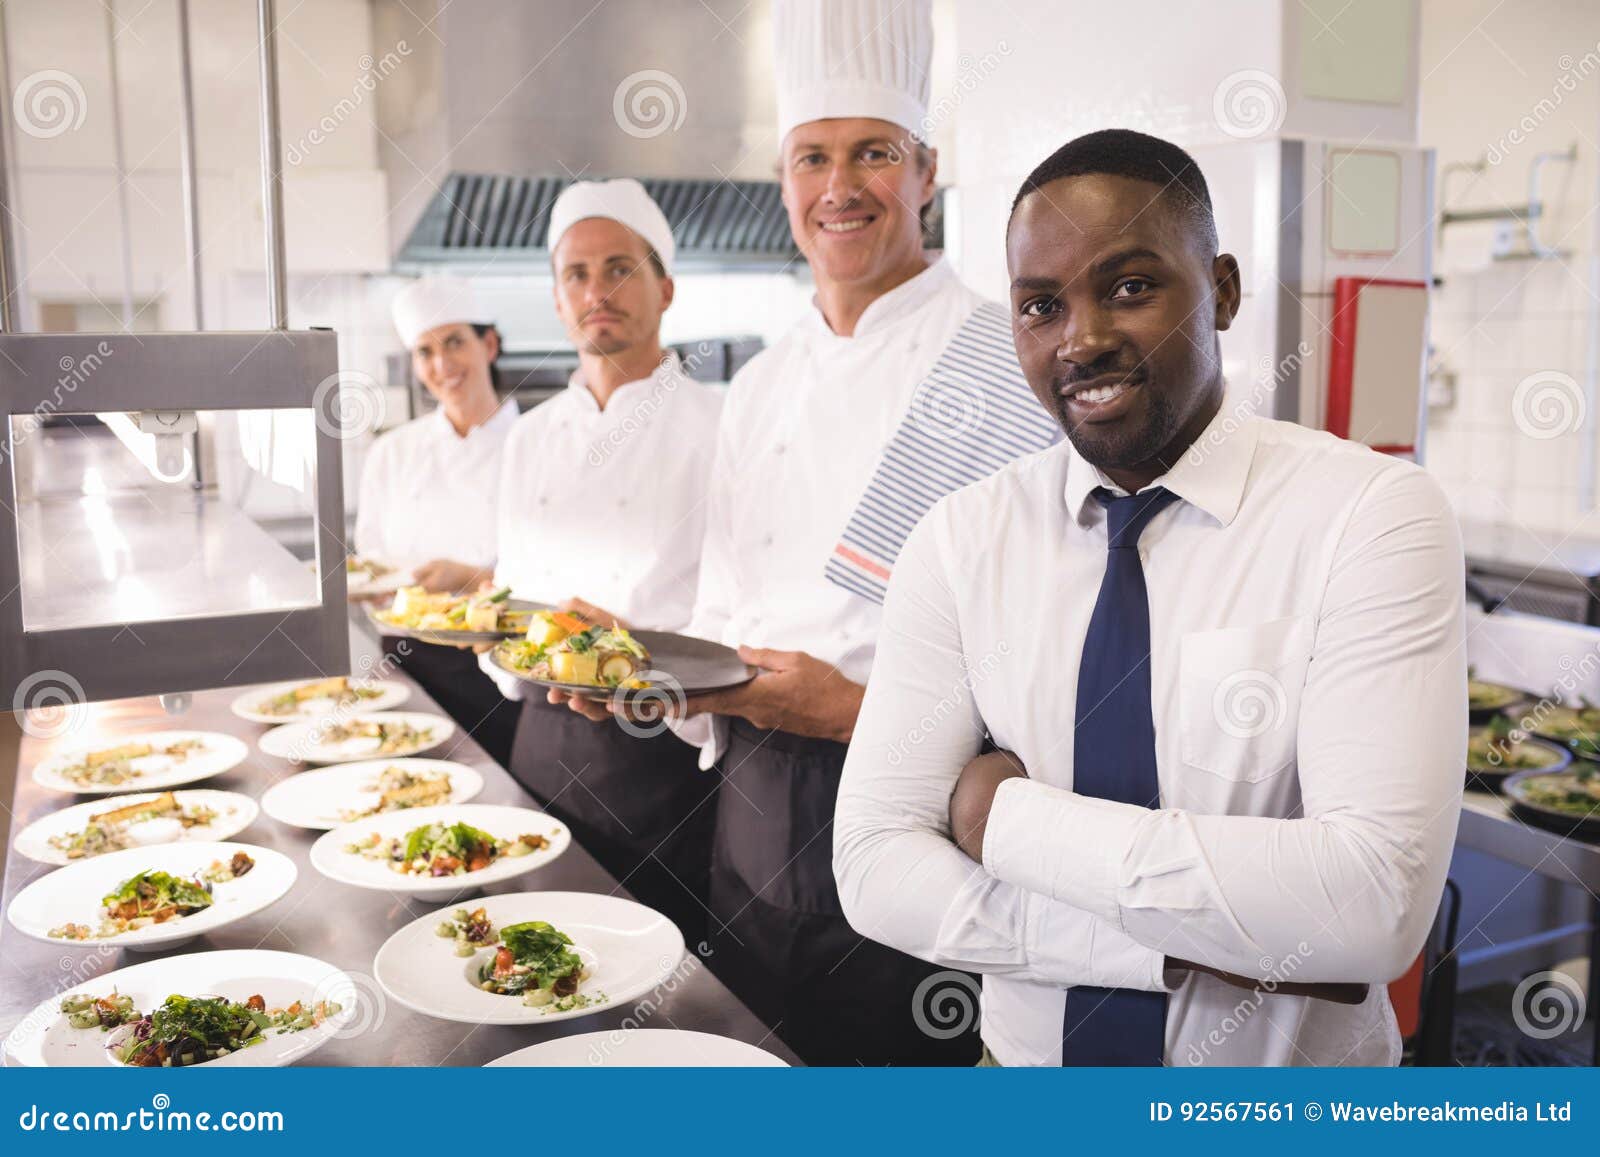 restaurant manager with his kitchen staff